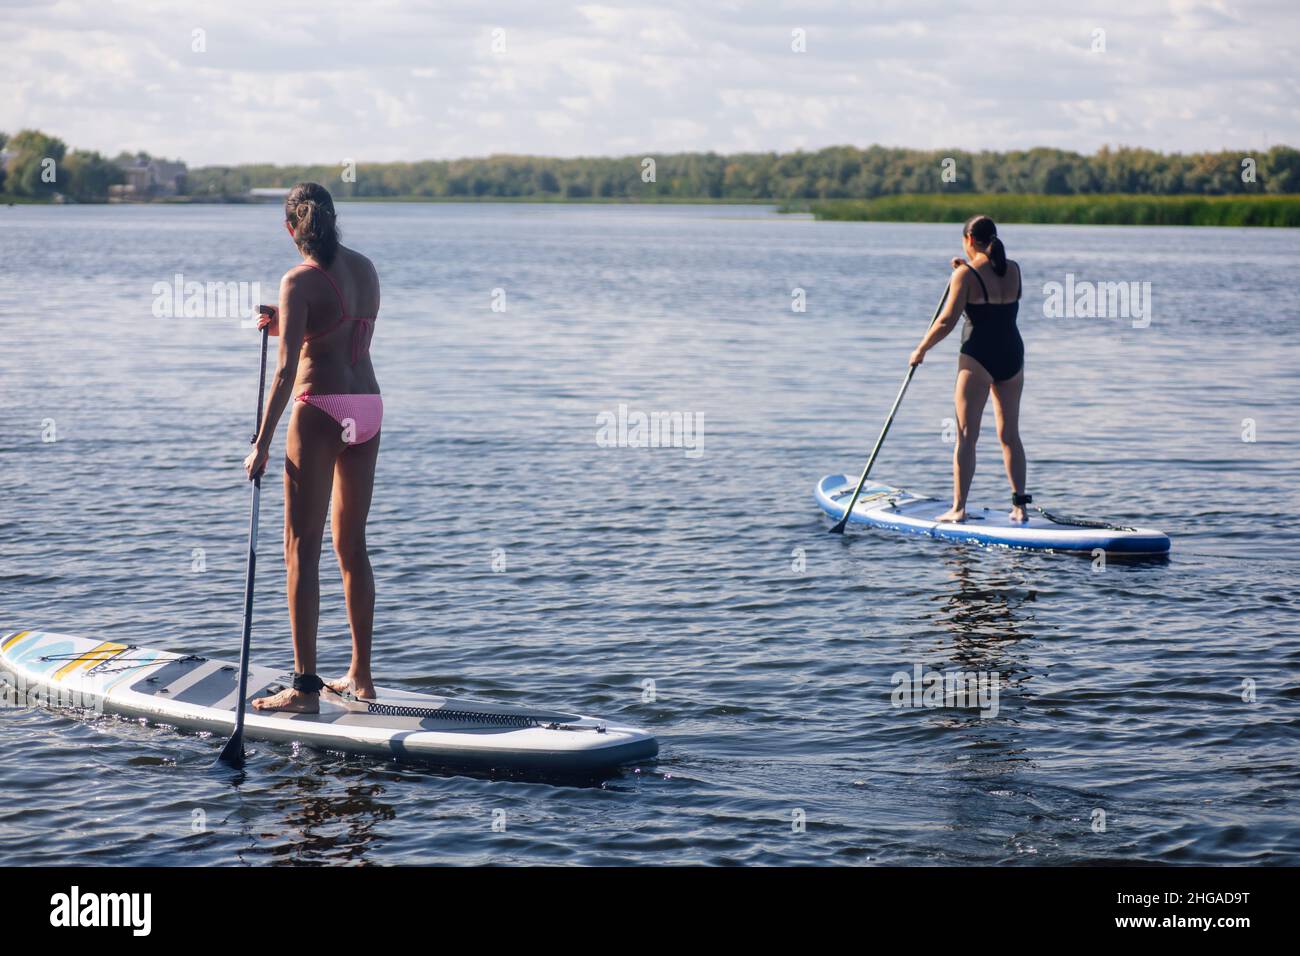 Two middle aged women puddle boarding on beautiful blue lake with oars in hands with trees and reeds in background both wearing swimming suits. Active Stock Photo